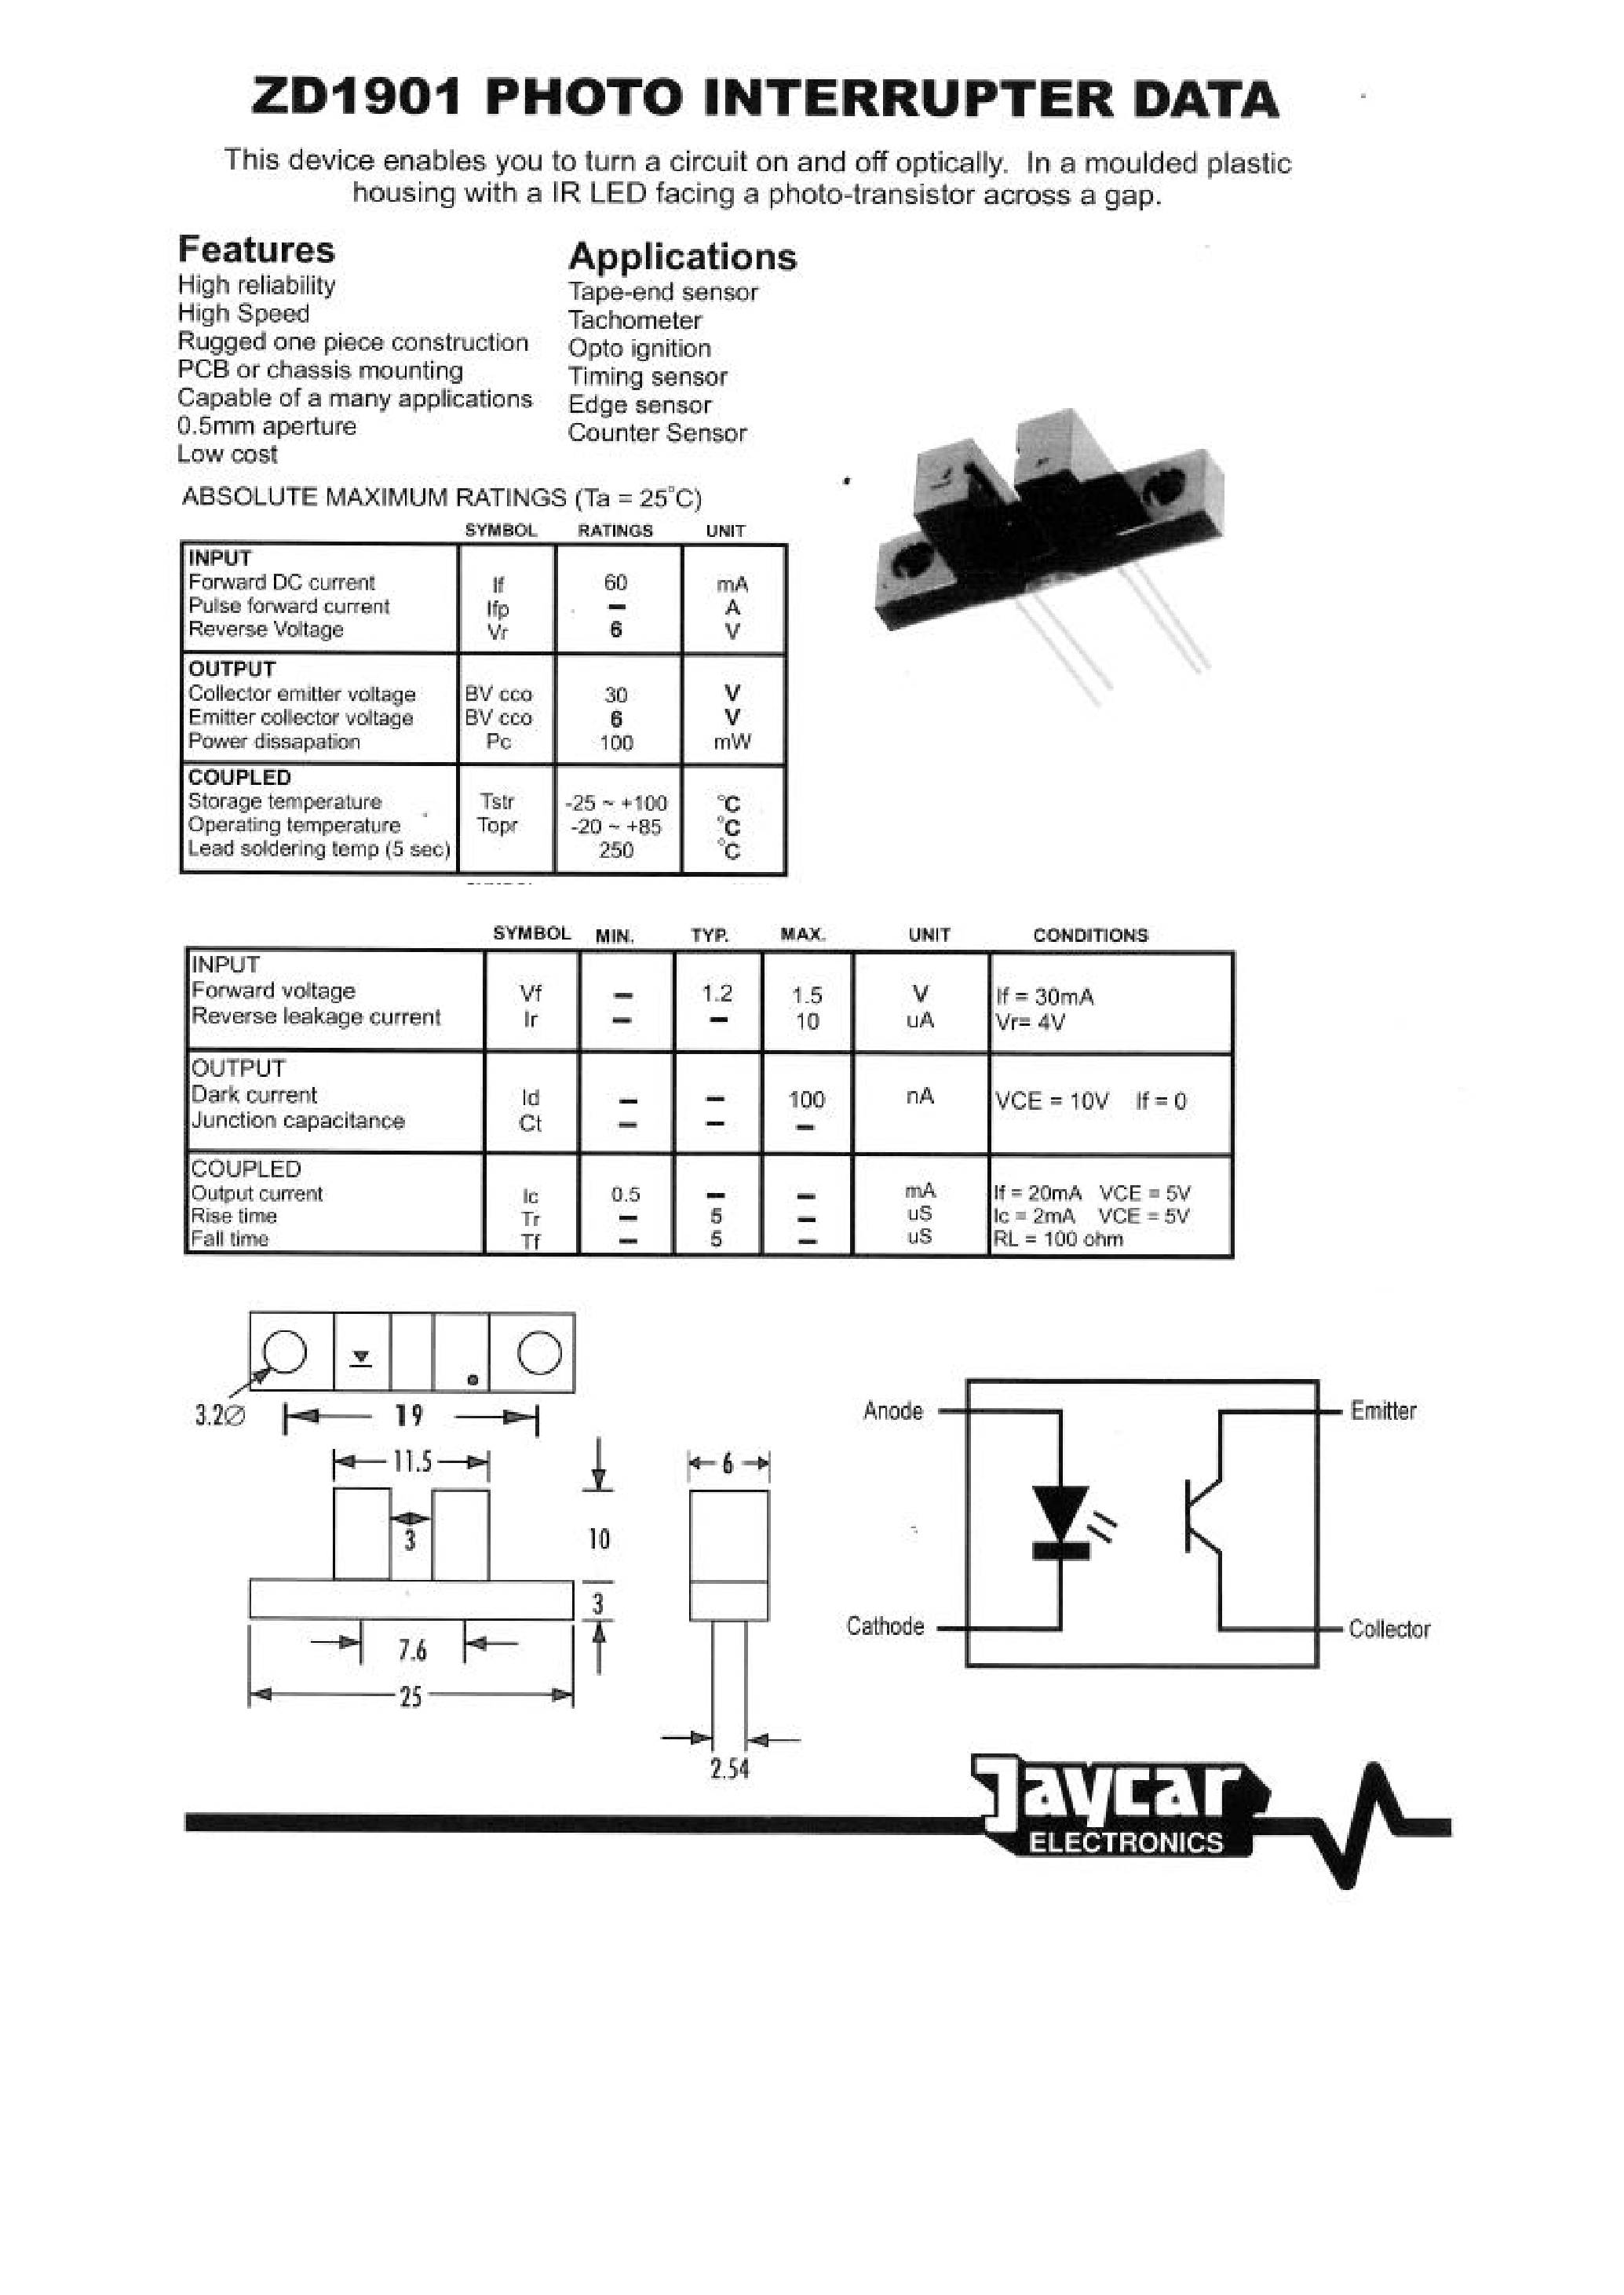 Datasheet ZD1901 - This Device Enables you to turn a Circuit on and off optically page 1